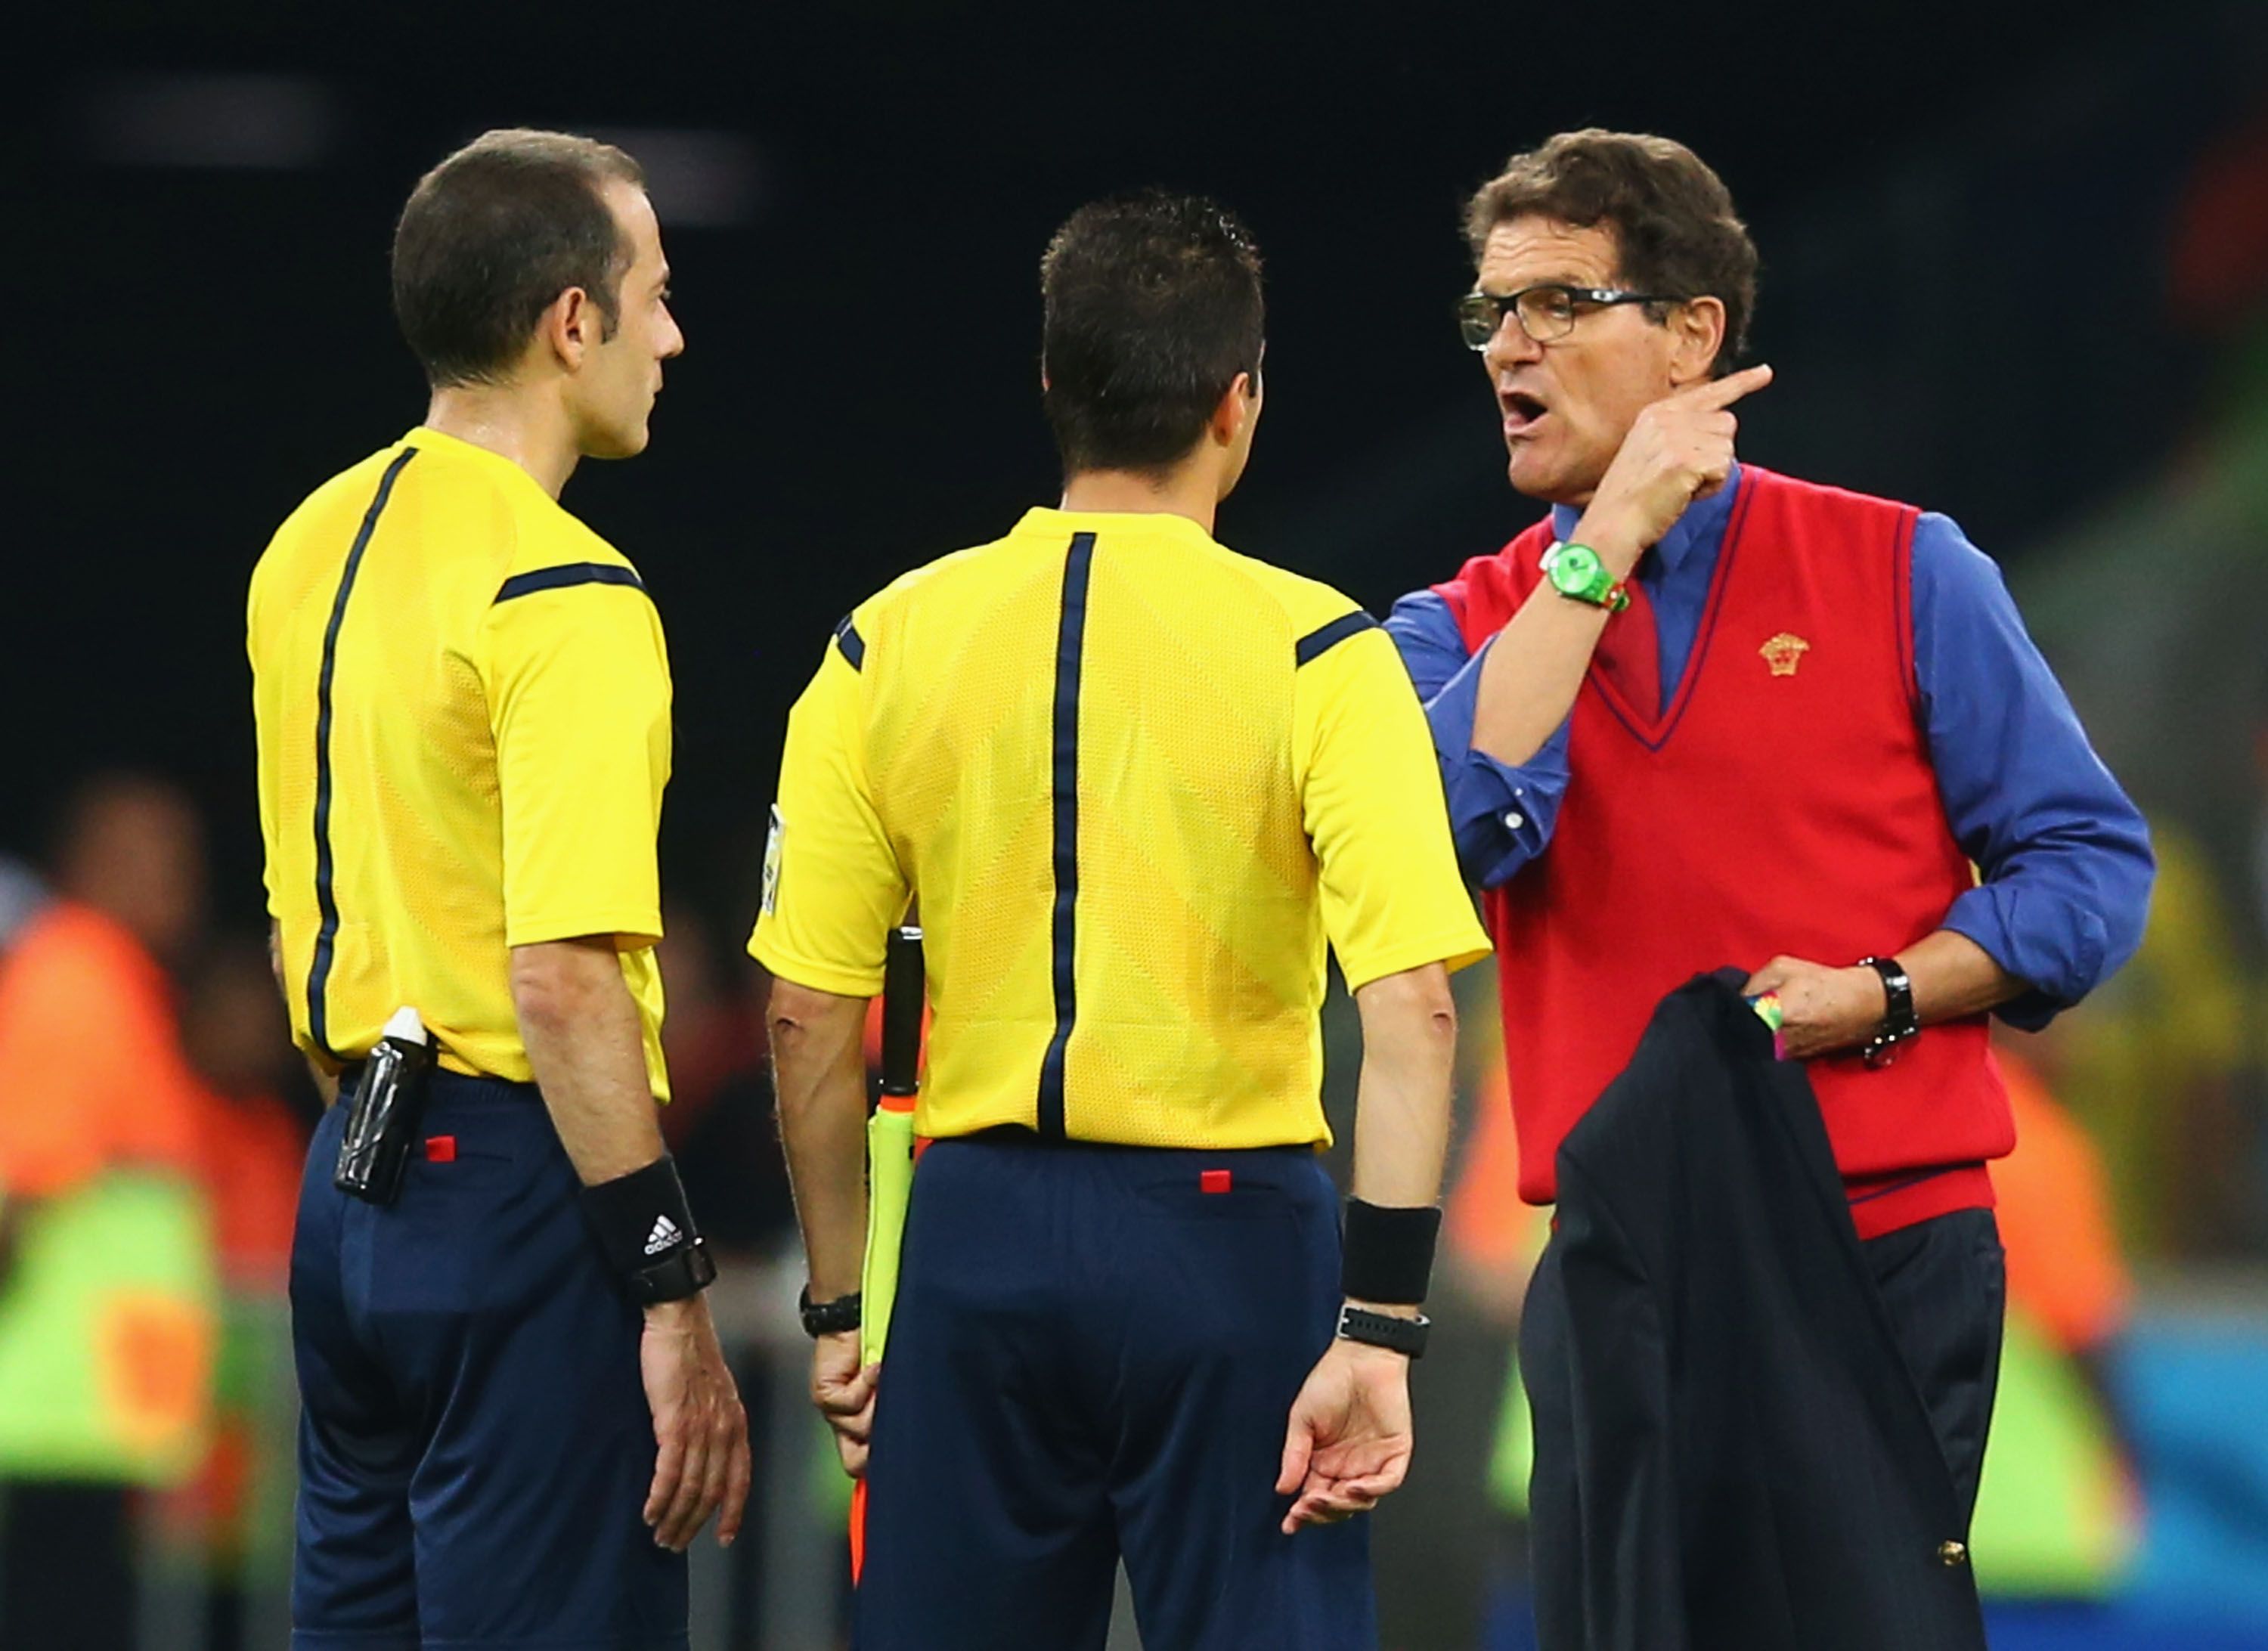 Fabio Capello argues with officials during 2014 World Cup